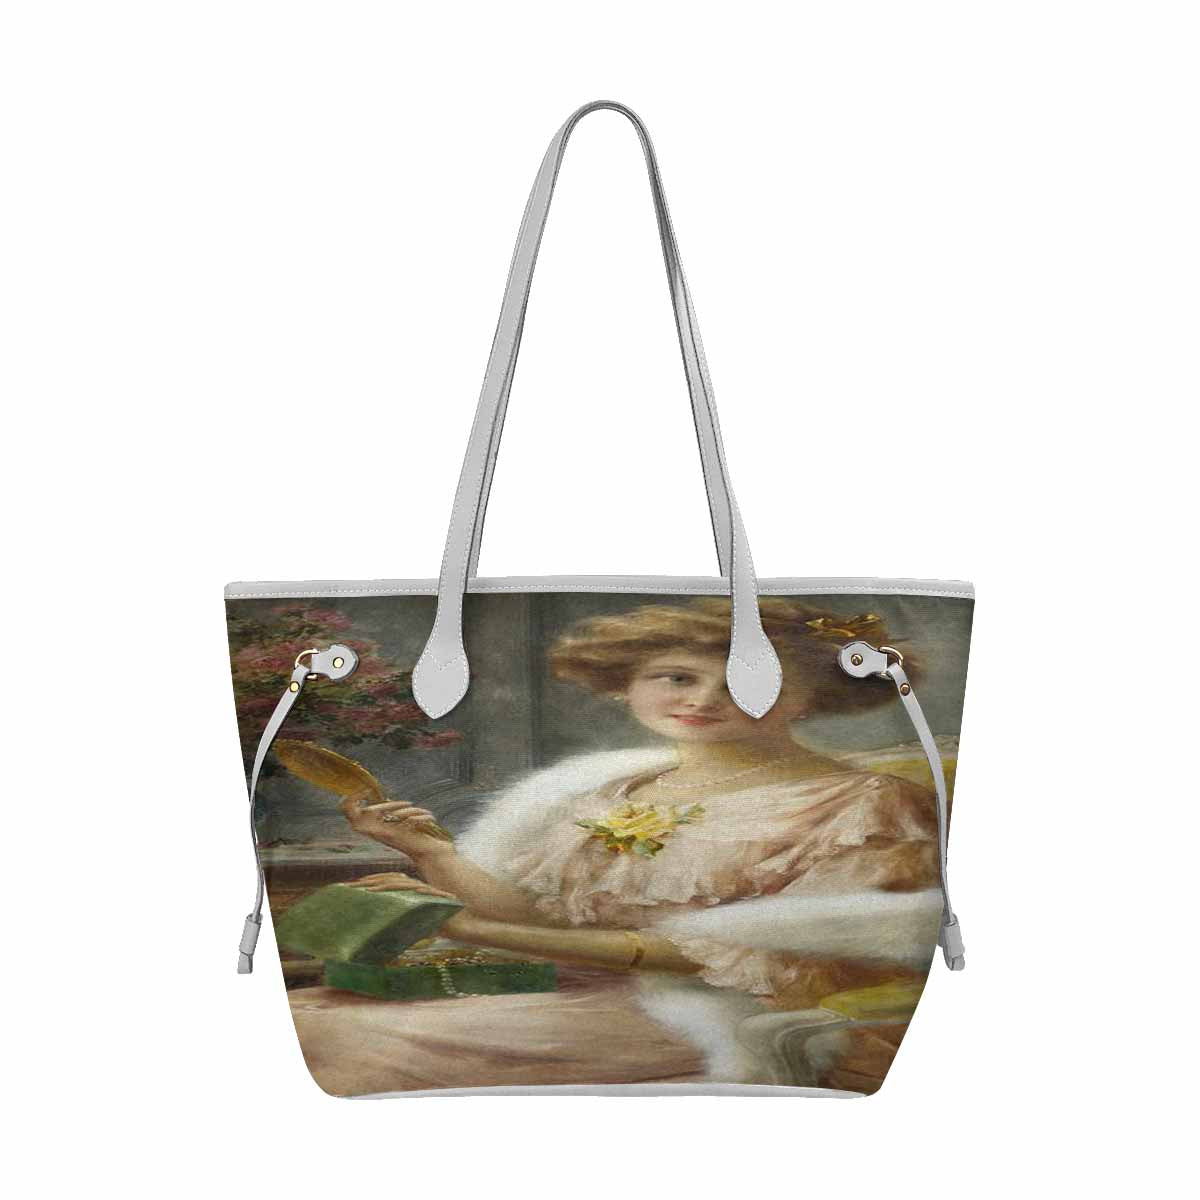 Victorian Lady Design Handbag, Model 1695361, A Young Lady With A Mirror, WHITE TRIM